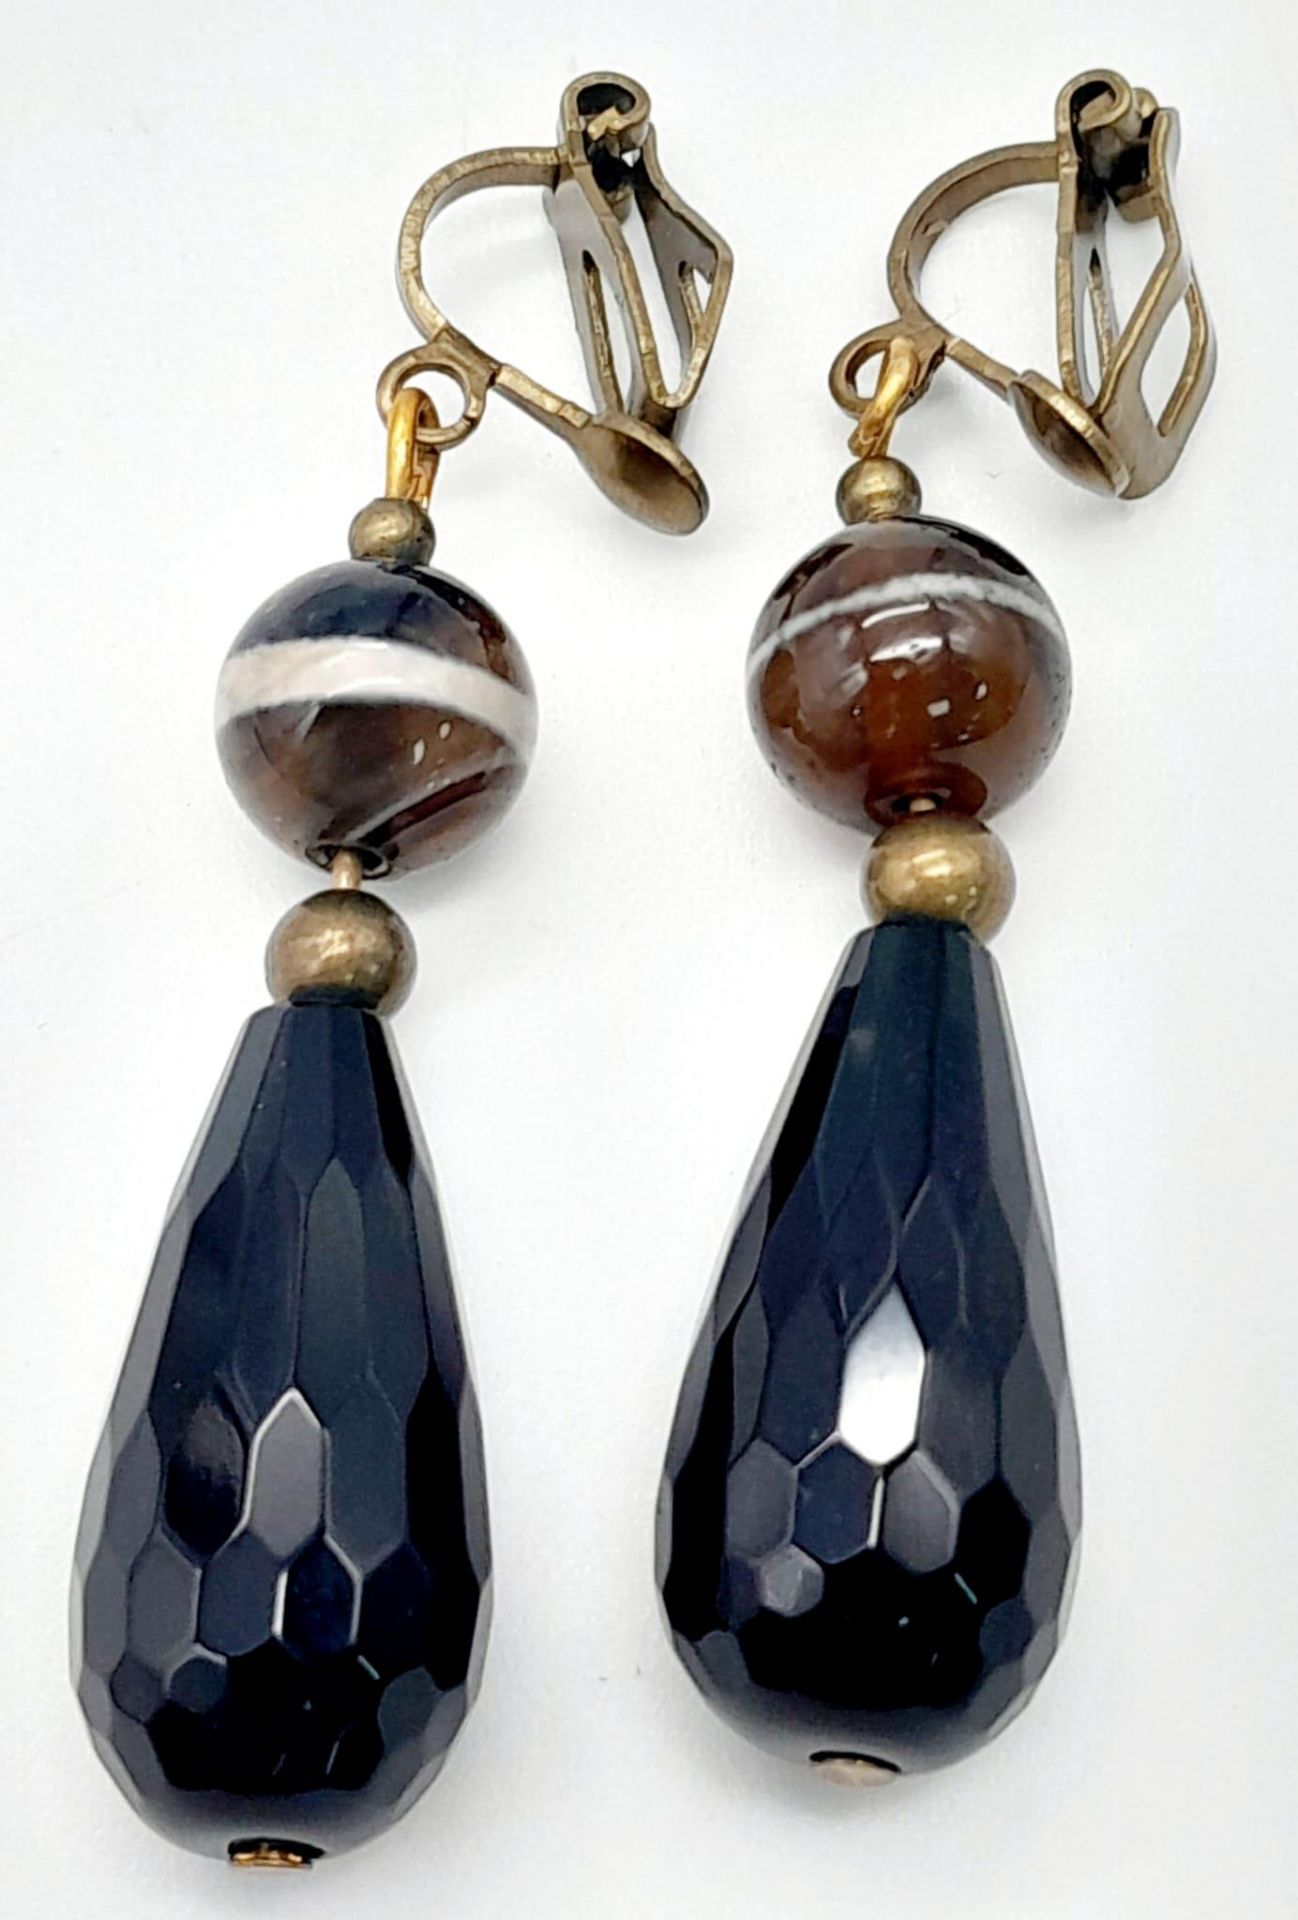 A Pair of Banded Agate and Jet Drop Earrings. 4cm drop. - Image 3 of 5